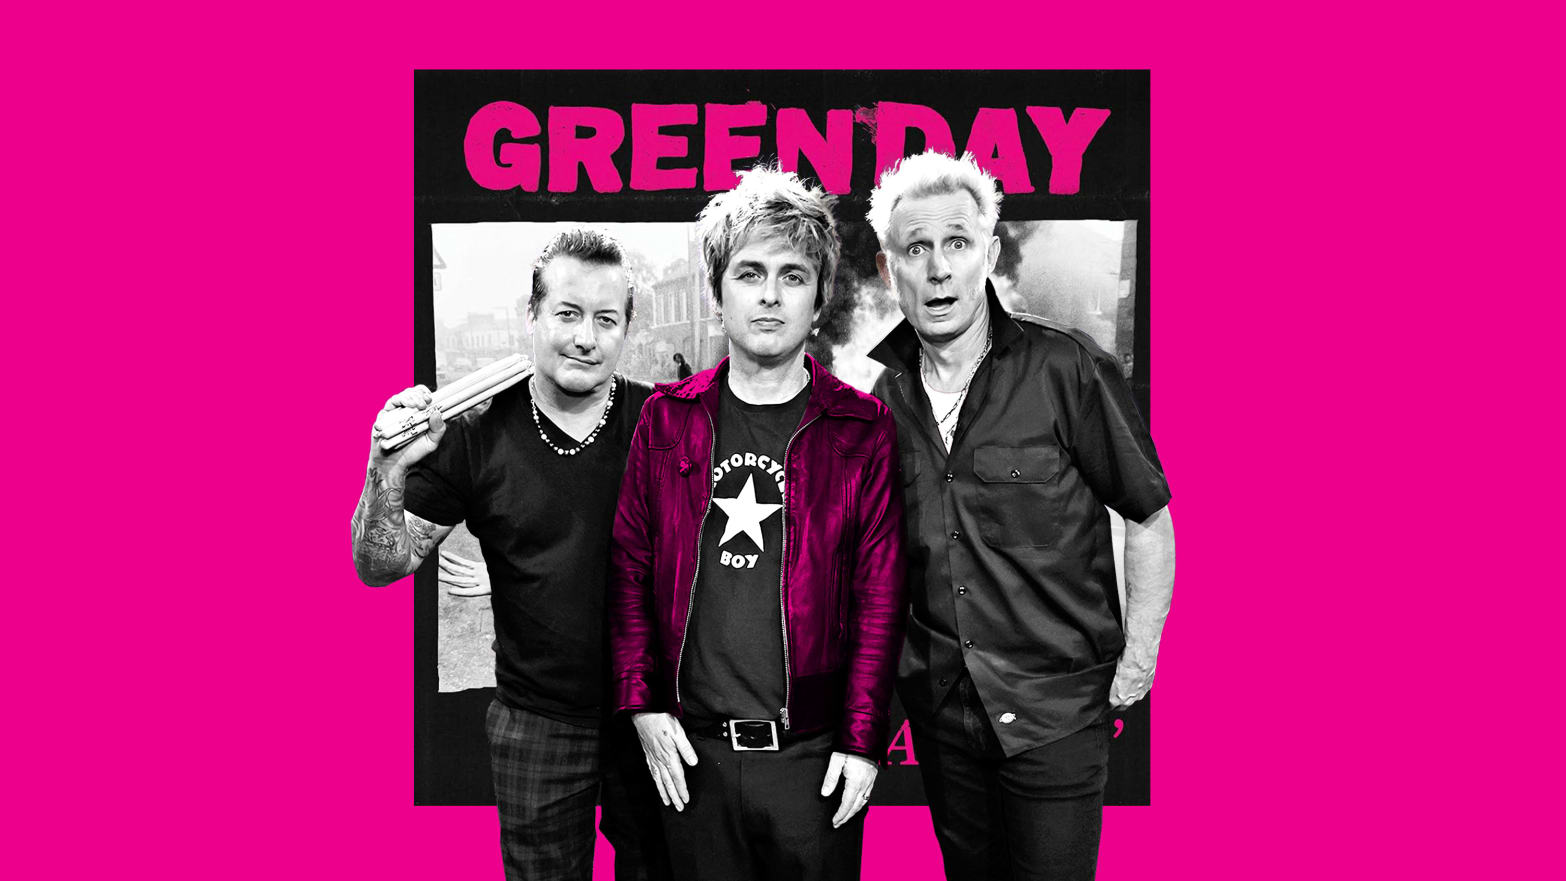 A photo illustration of Green Day in front of their new album cover